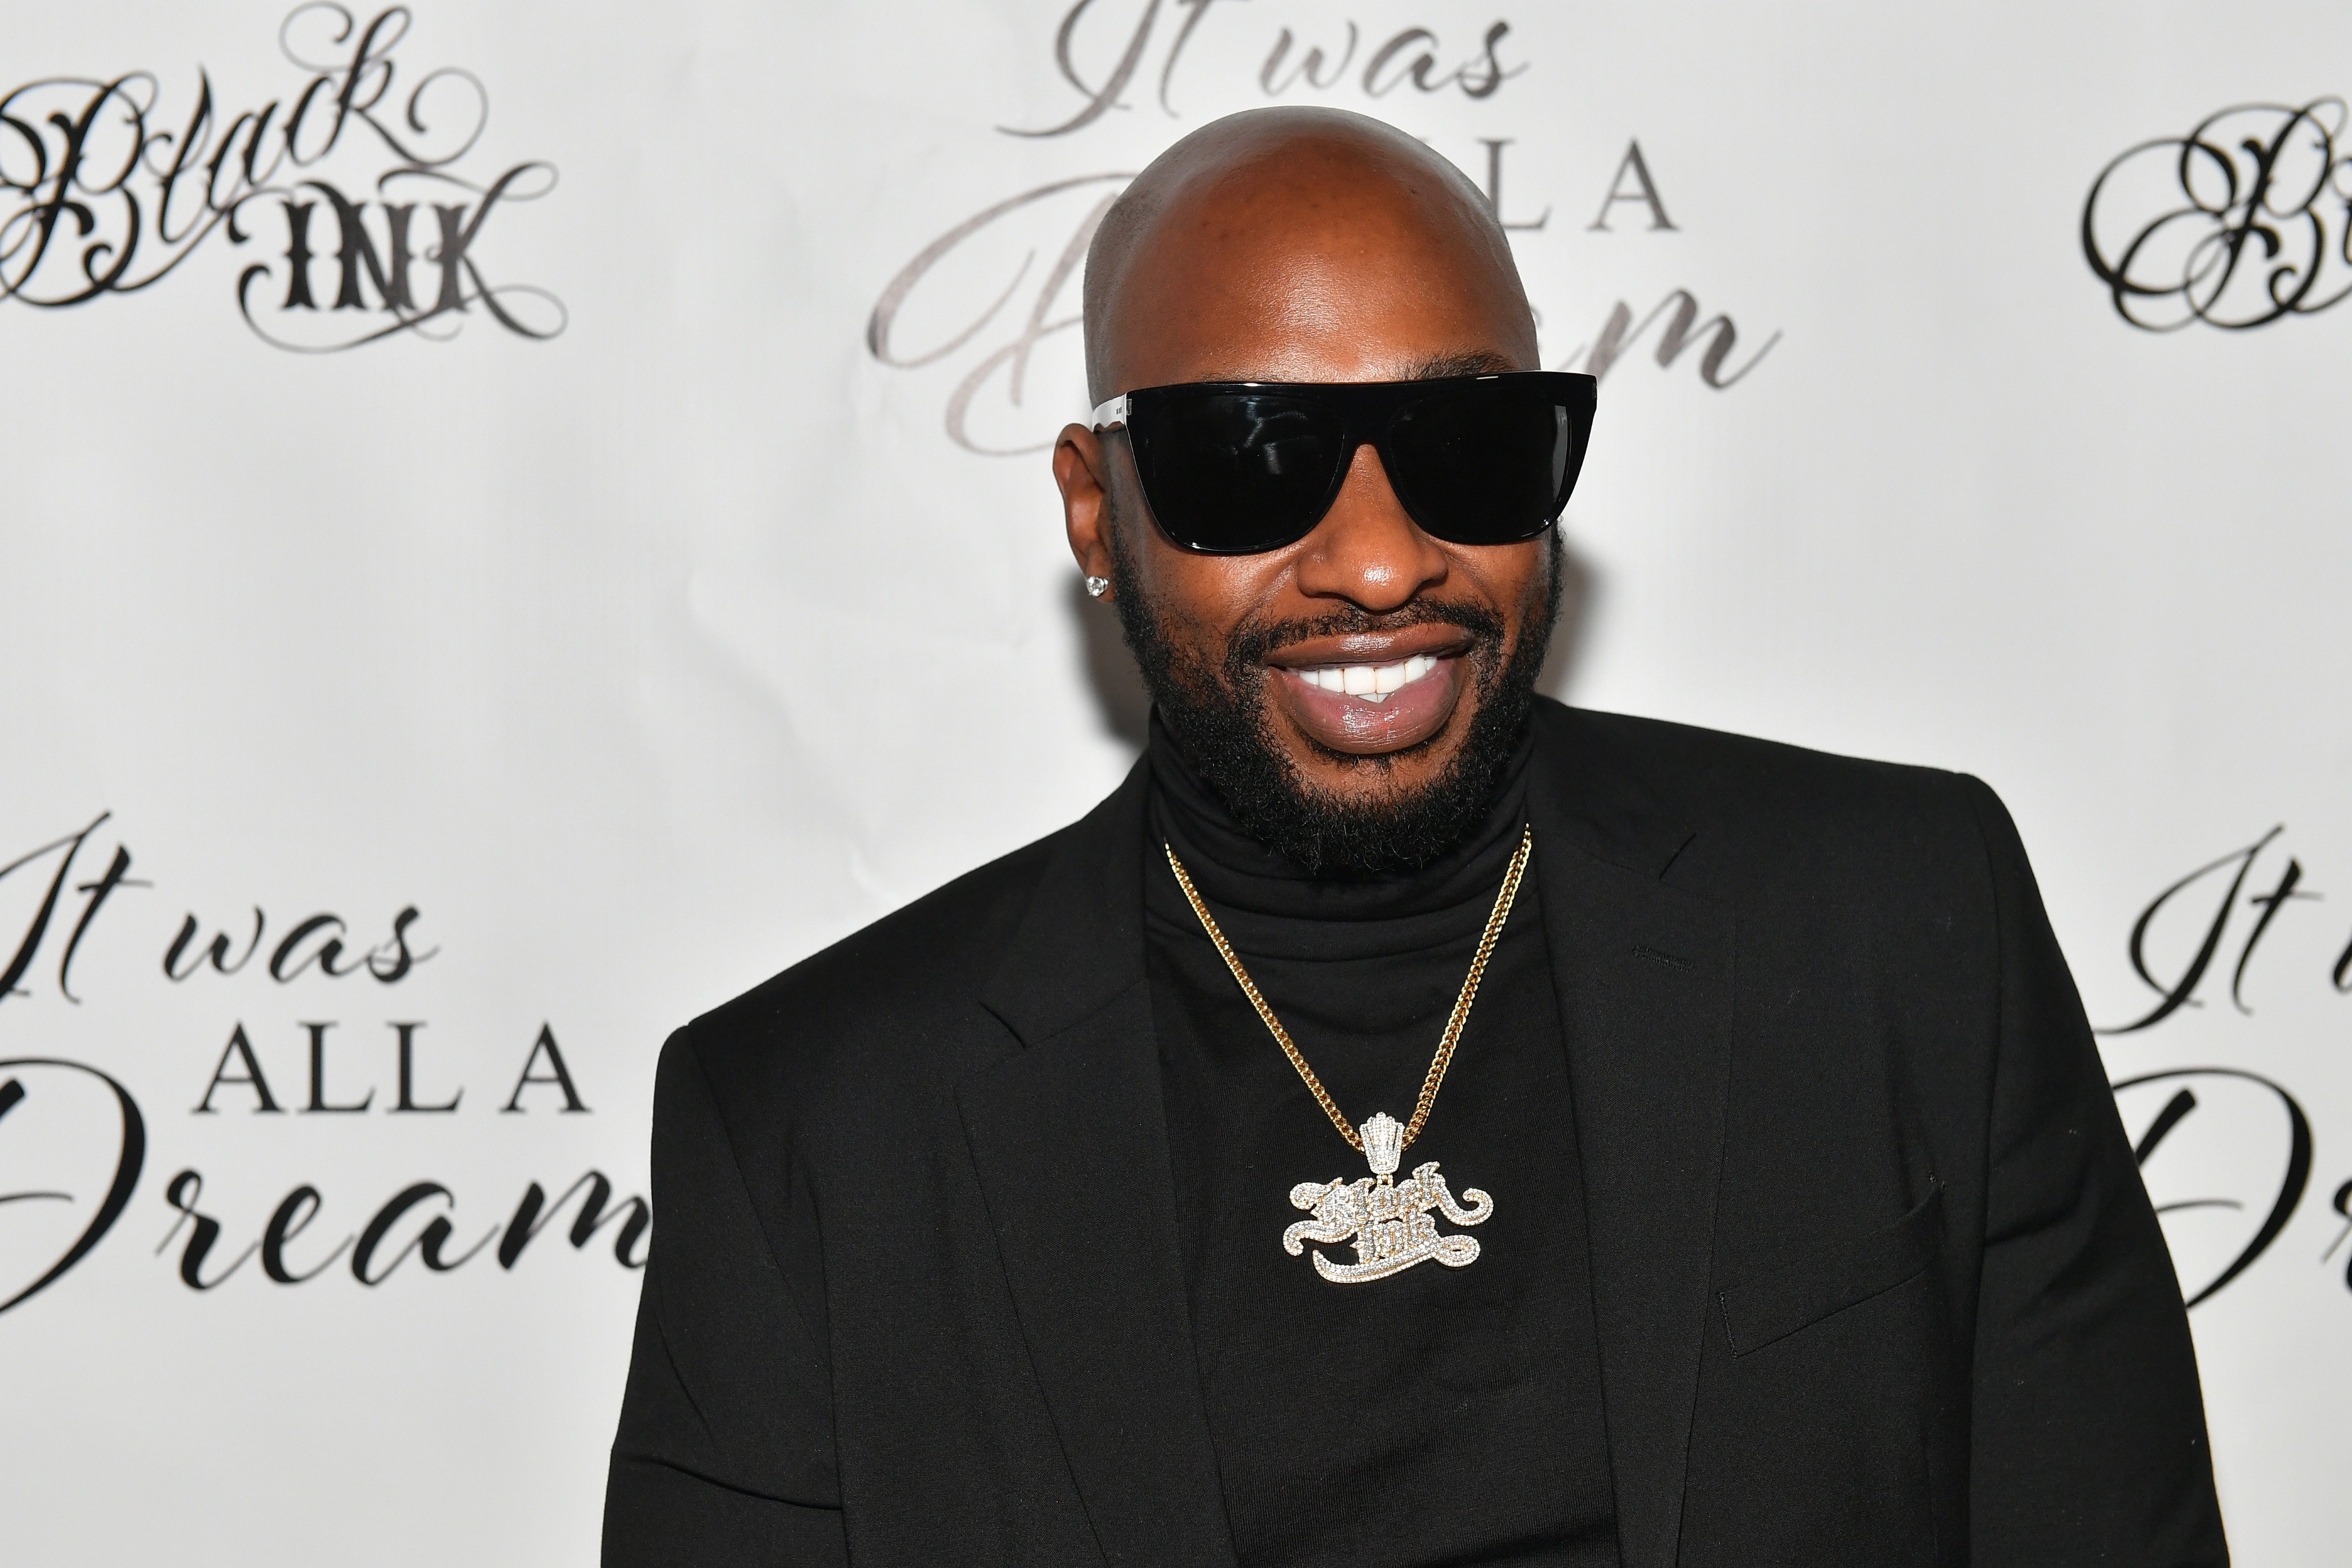 Ceaser Emanuel of Black Ink Crew attends "It Was All A Dream" Black Ink Gallery And Silent Auction